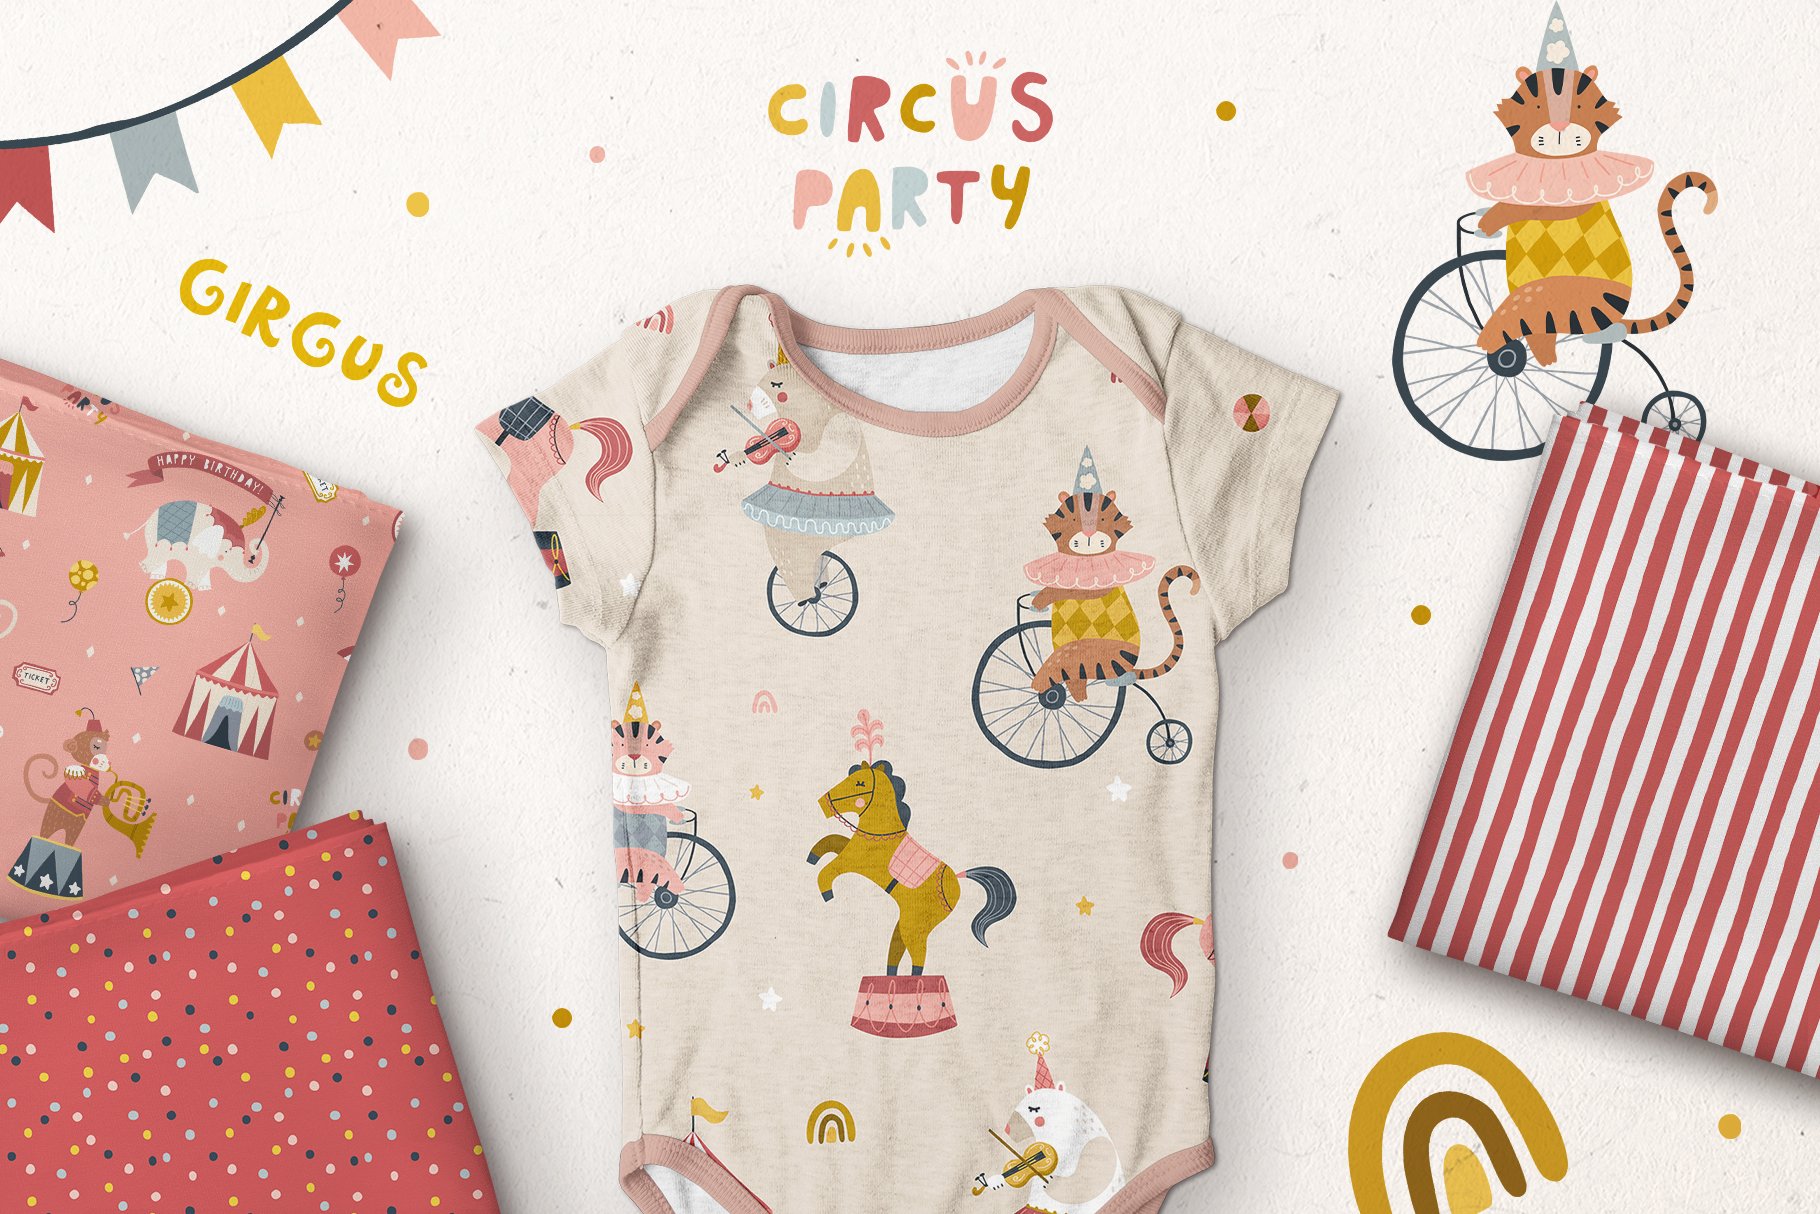 Girly clothes with circus animals.